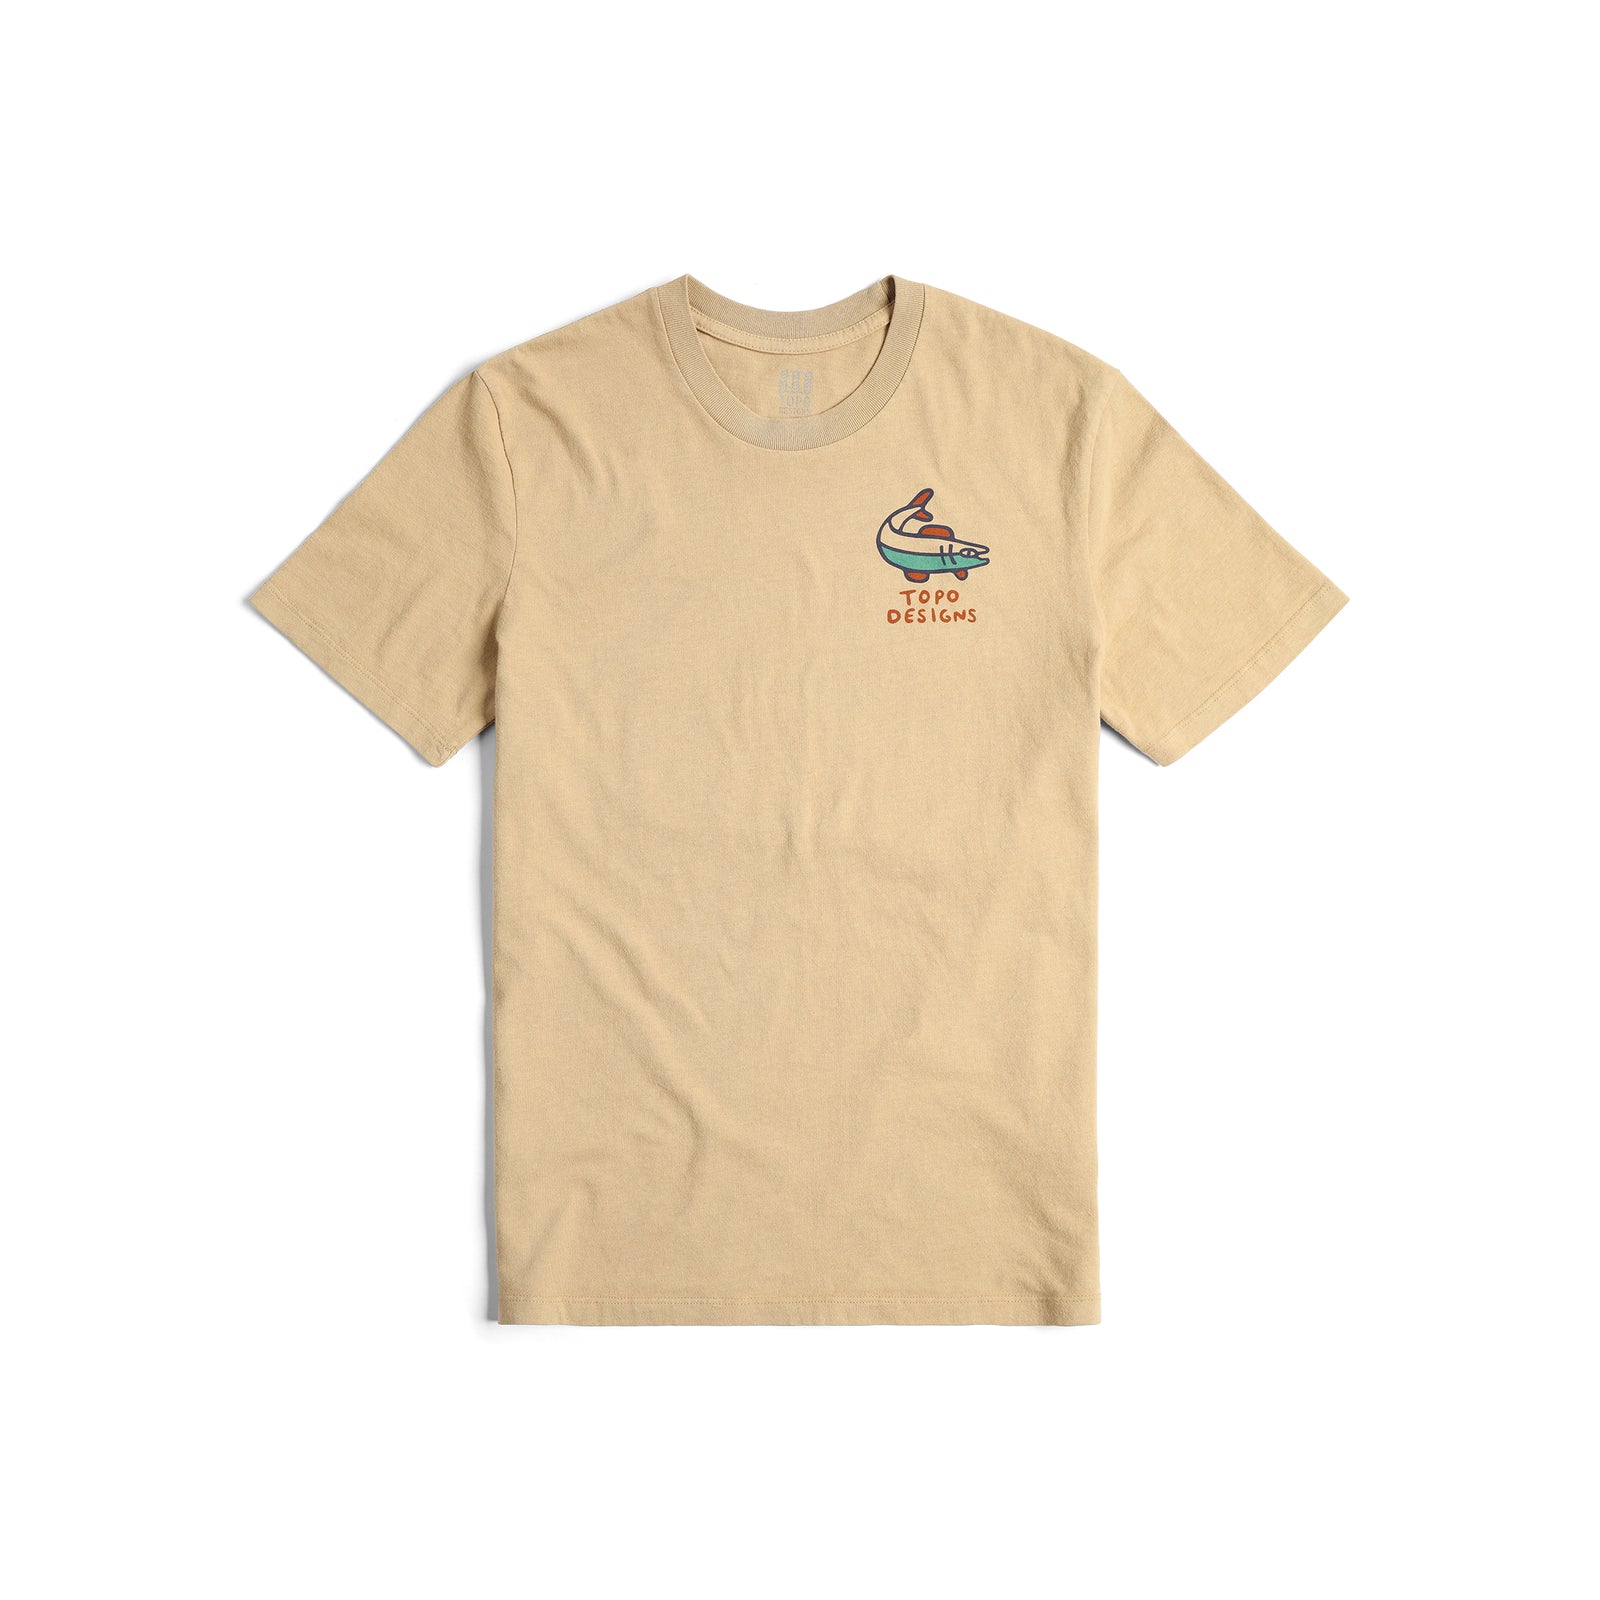 Front View of Topo Designs Poudre River Tee - Men's in "Sahara"